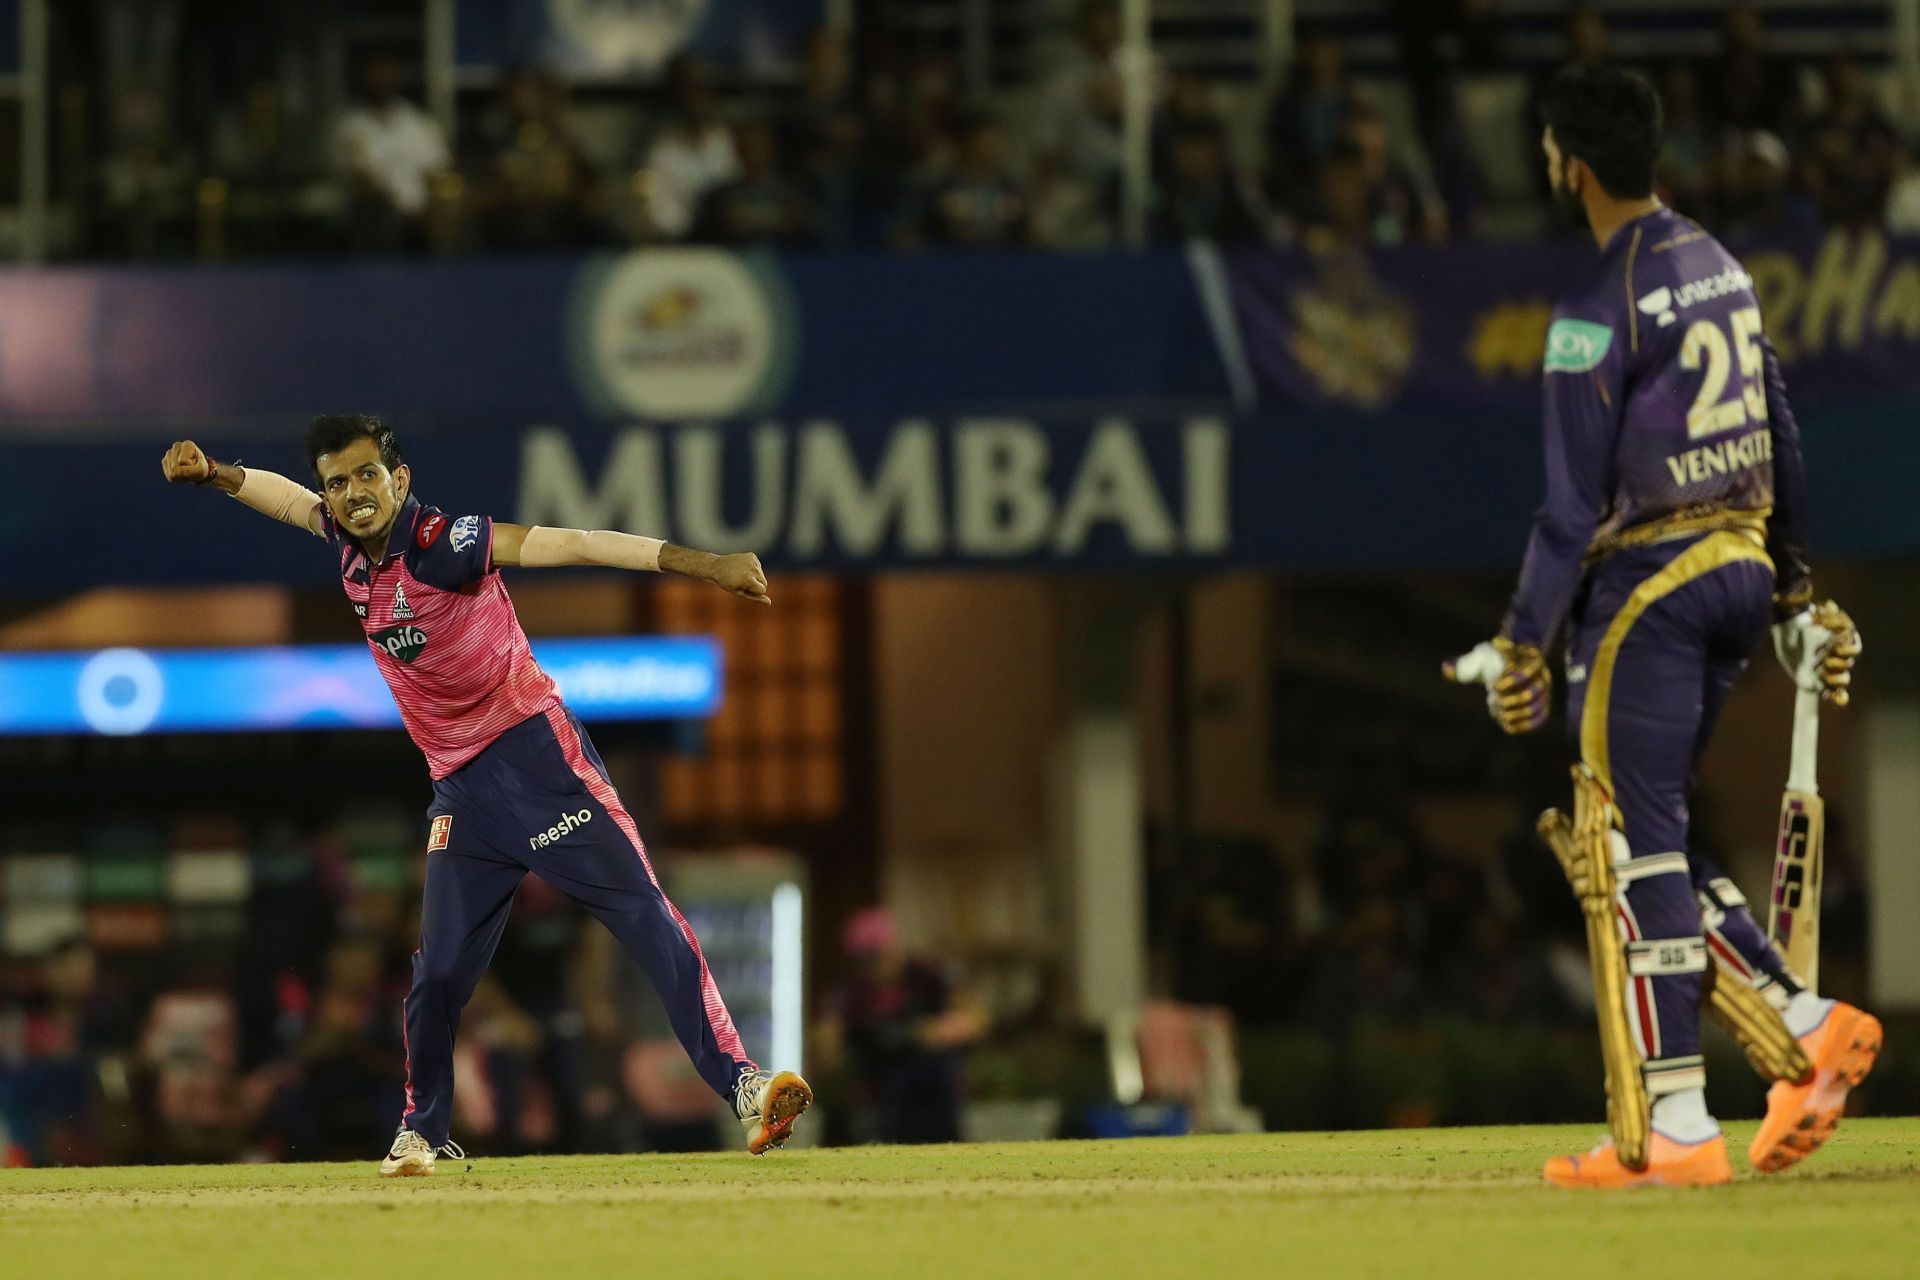 Yuzvendra Chahal was adjudged Player of the Match for his maiden fifer in IPL [Credits: IPL]